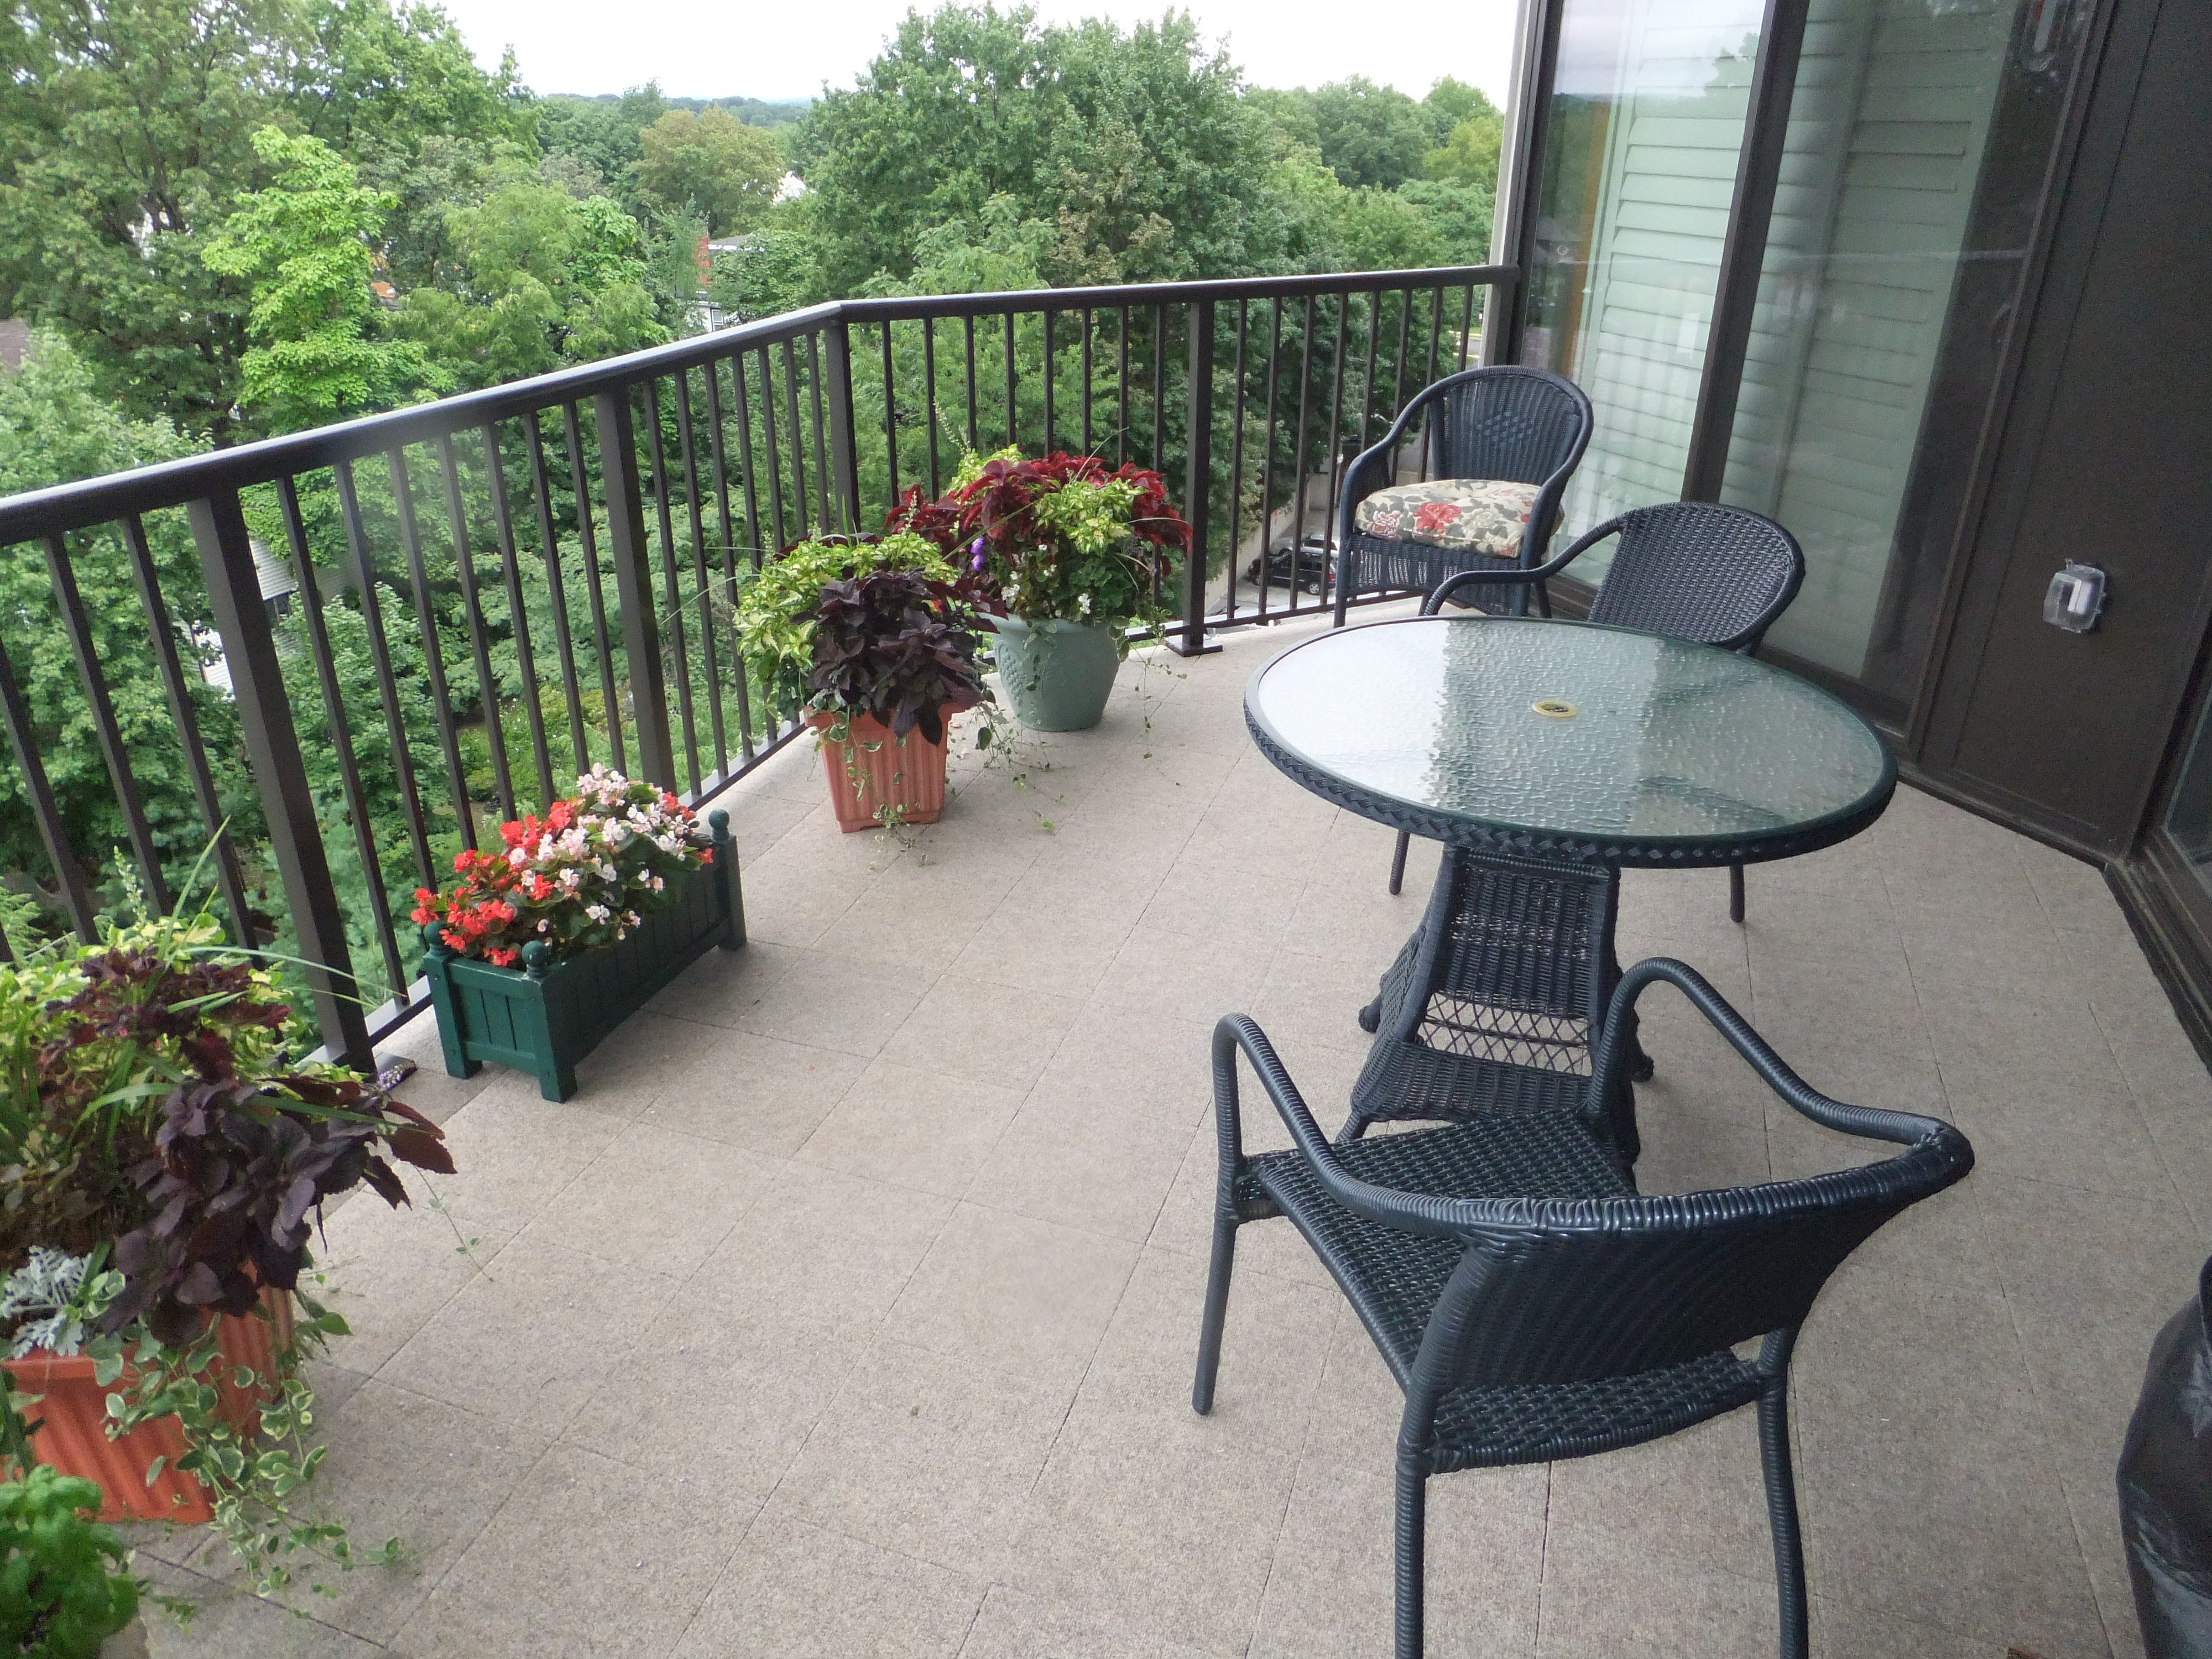 New System Allows Carpet On Balconies, Outdoor Carpet Tiles For Patio